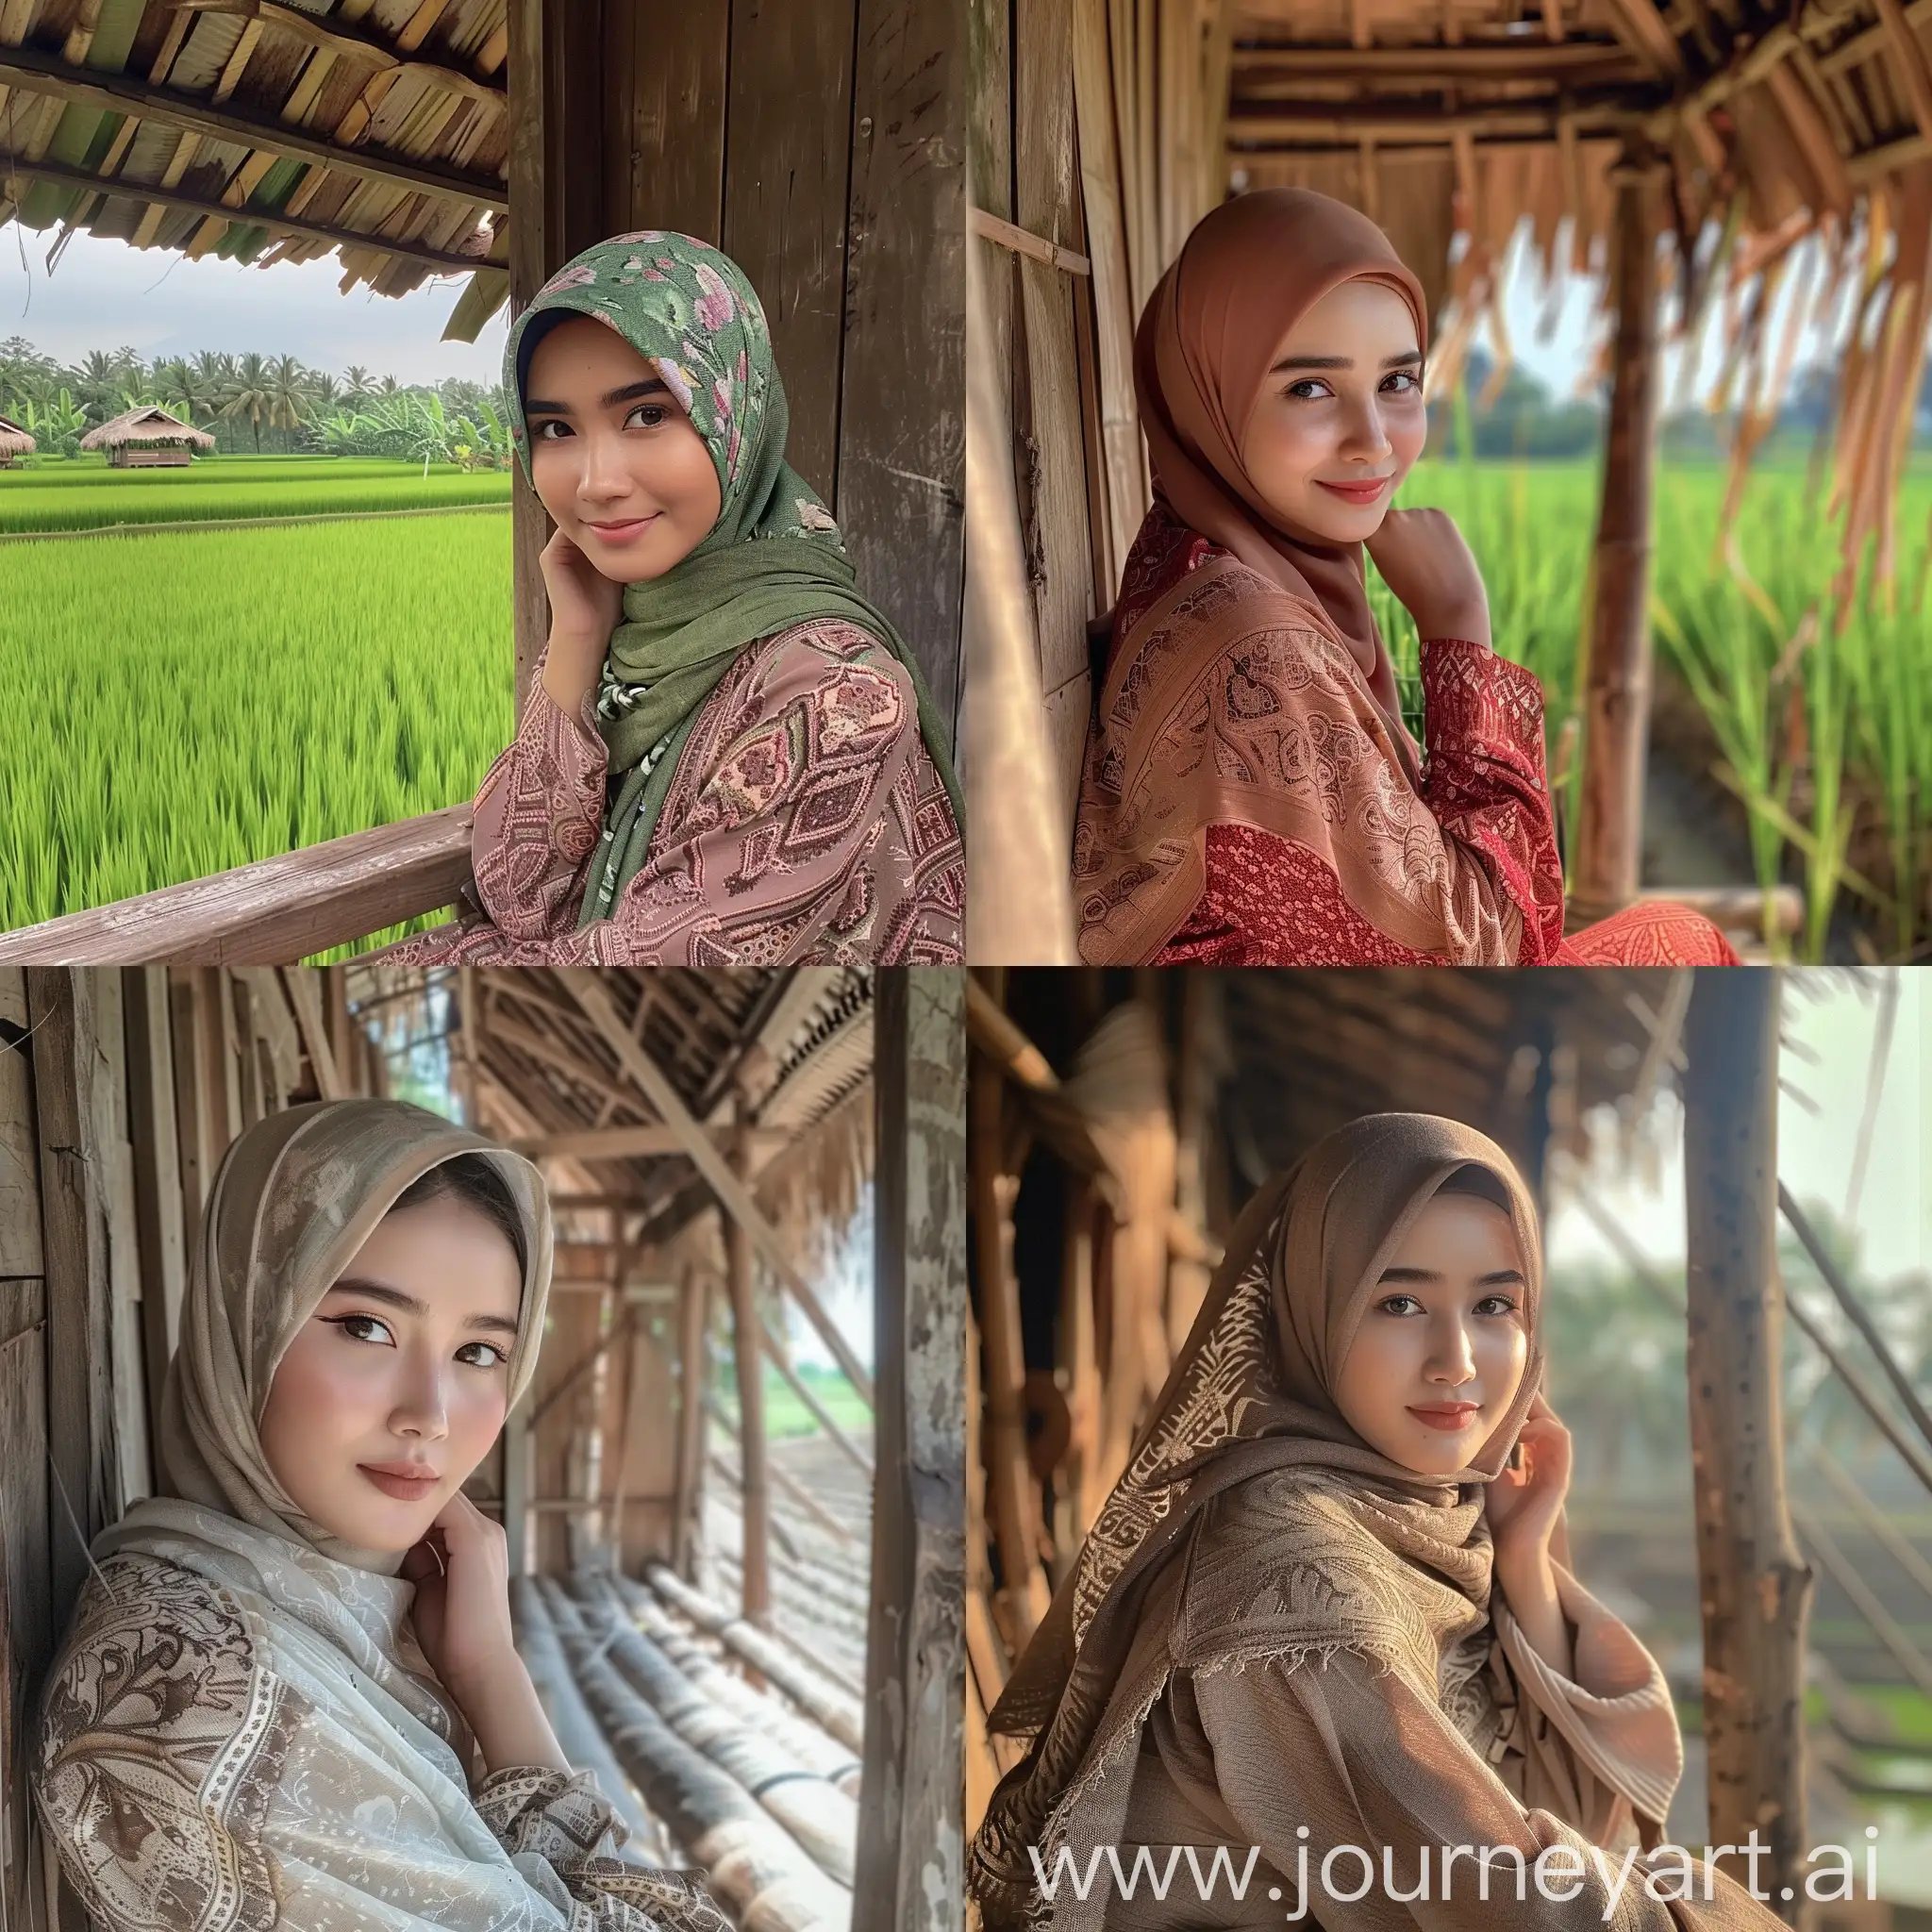 1 Indonesian girl, hijab, 22 years old, influencer, beauty, in the rice fields, make-up, sitting in a wooden hut, no effect, selfie, iphone selfie, no filter, natural iphone photo